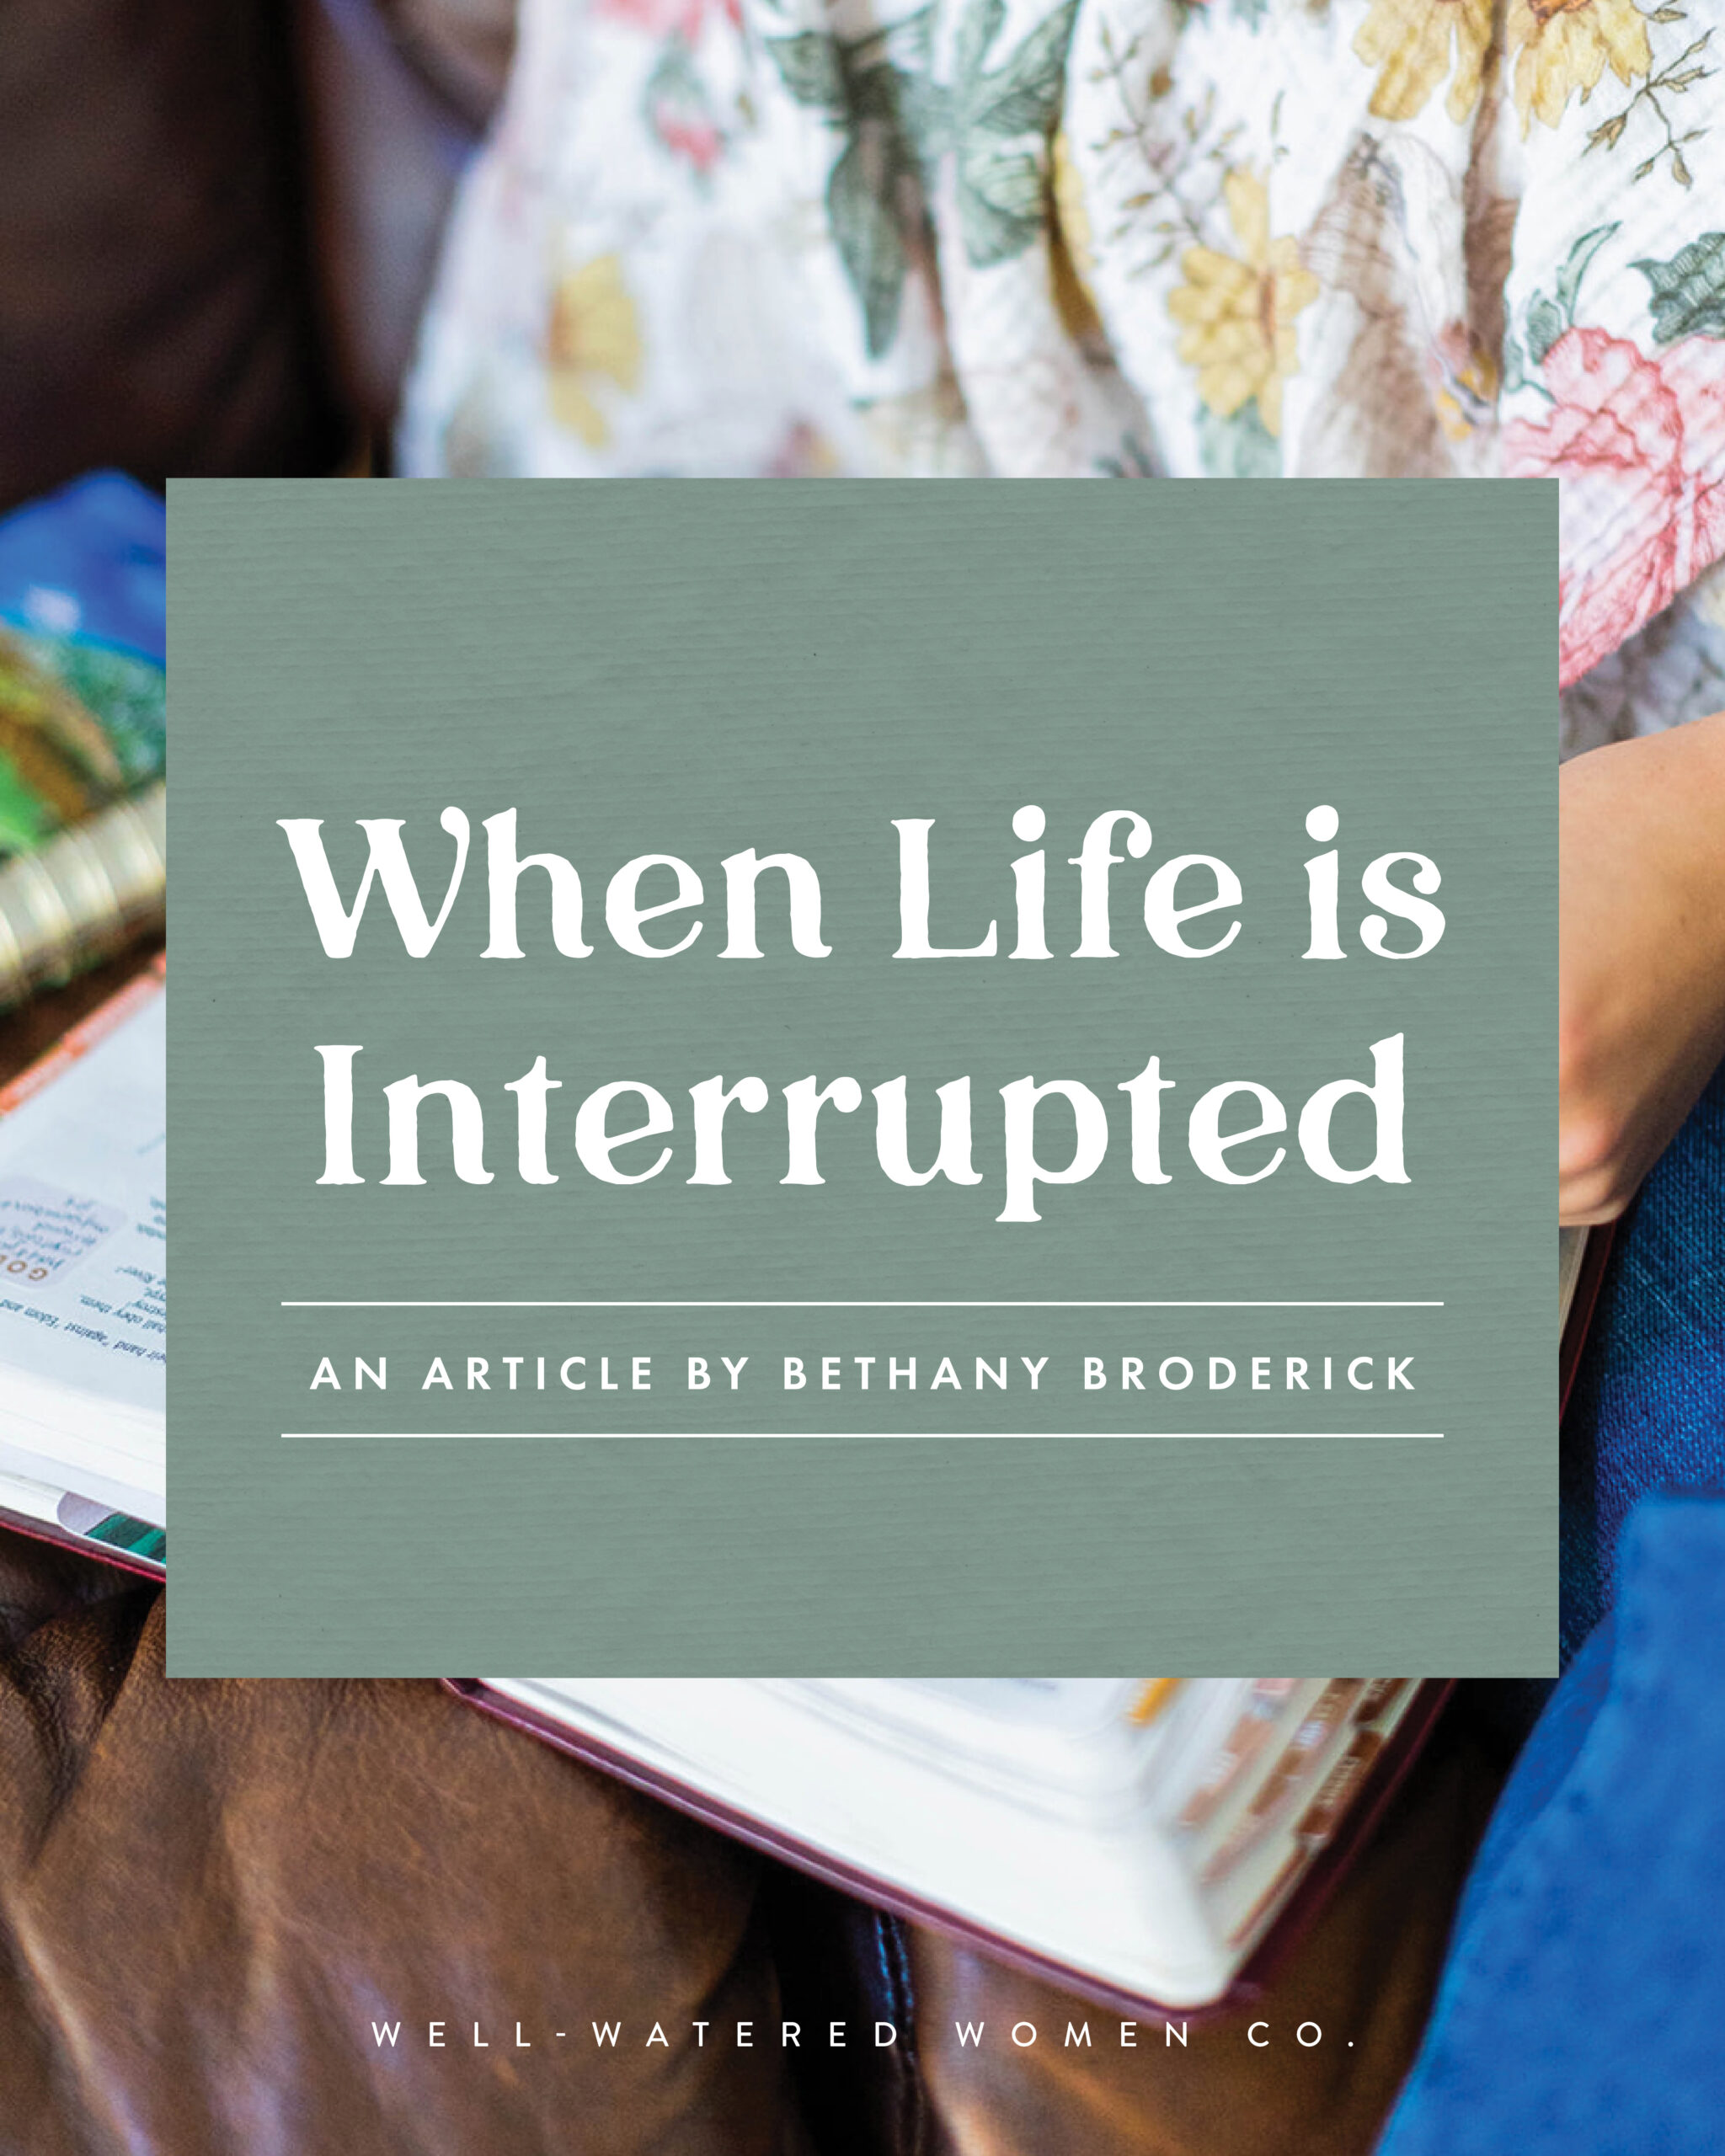 When Life is Interrupted - an article from Well-Watered Women